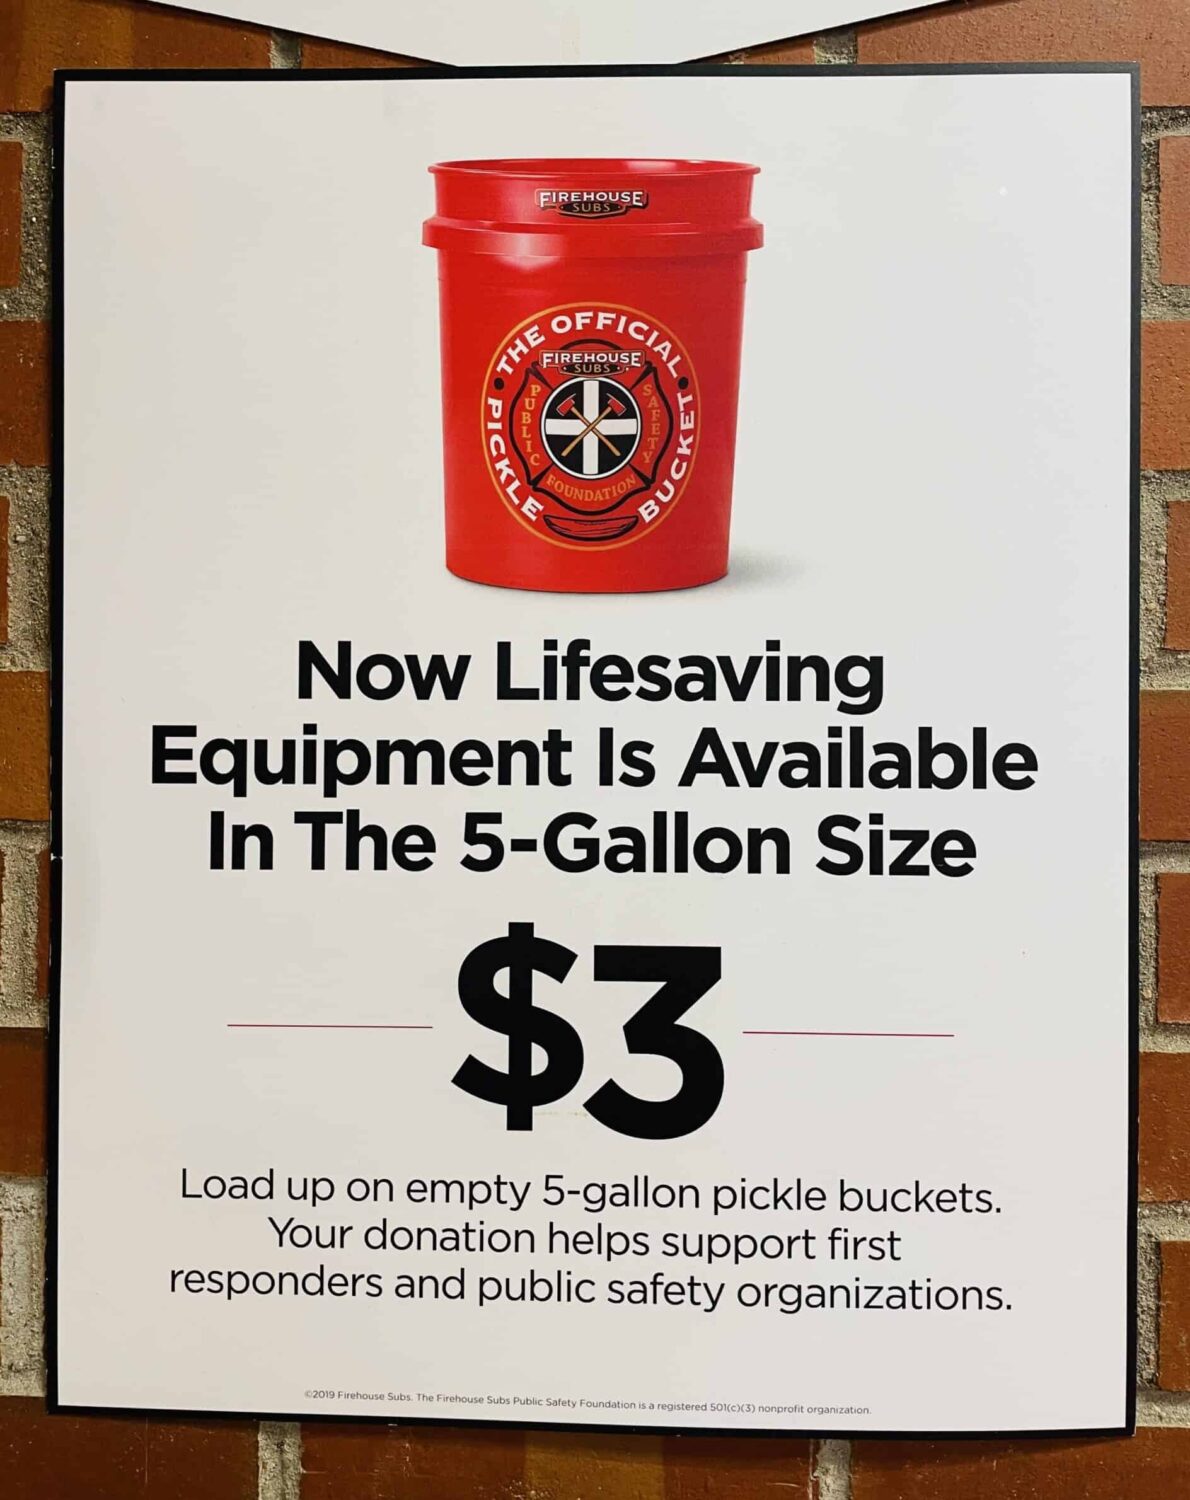 Get Empty 5Gallon Pickle Bucket for 3 at Firehouse Subs Mile High